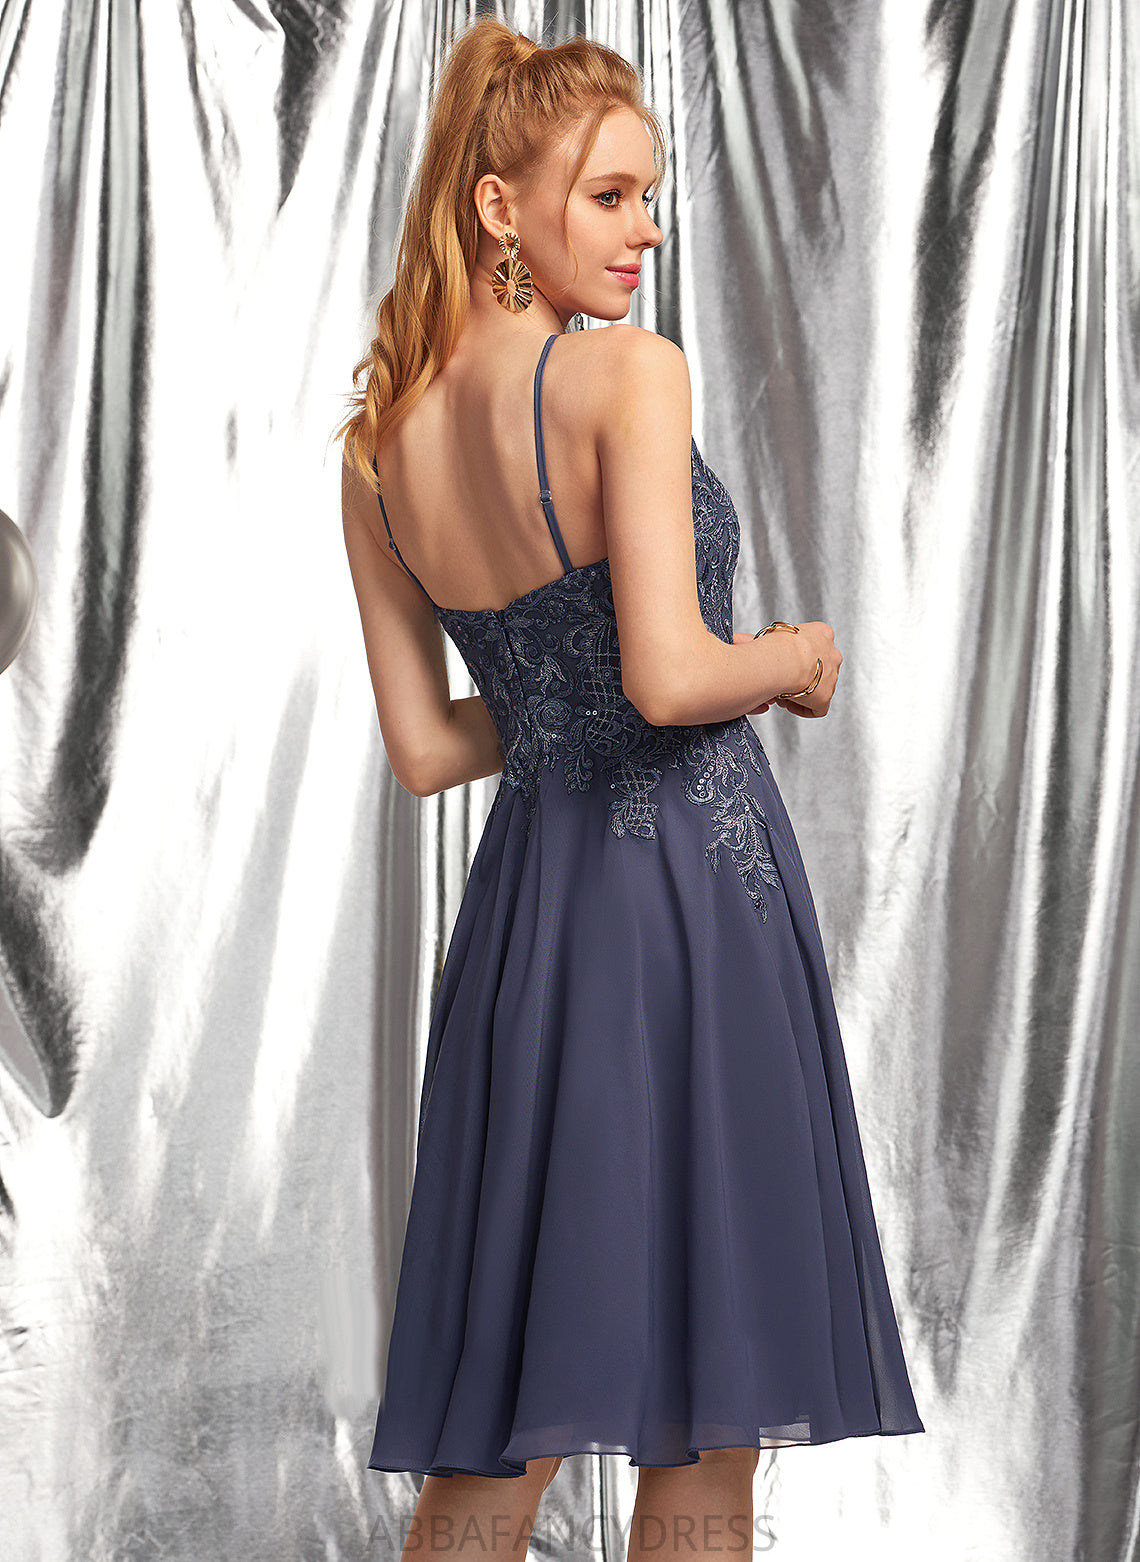 Arabella Chiffon With Appliques Lace Scoop A-Line Knee-Length Neck Prom Dresses